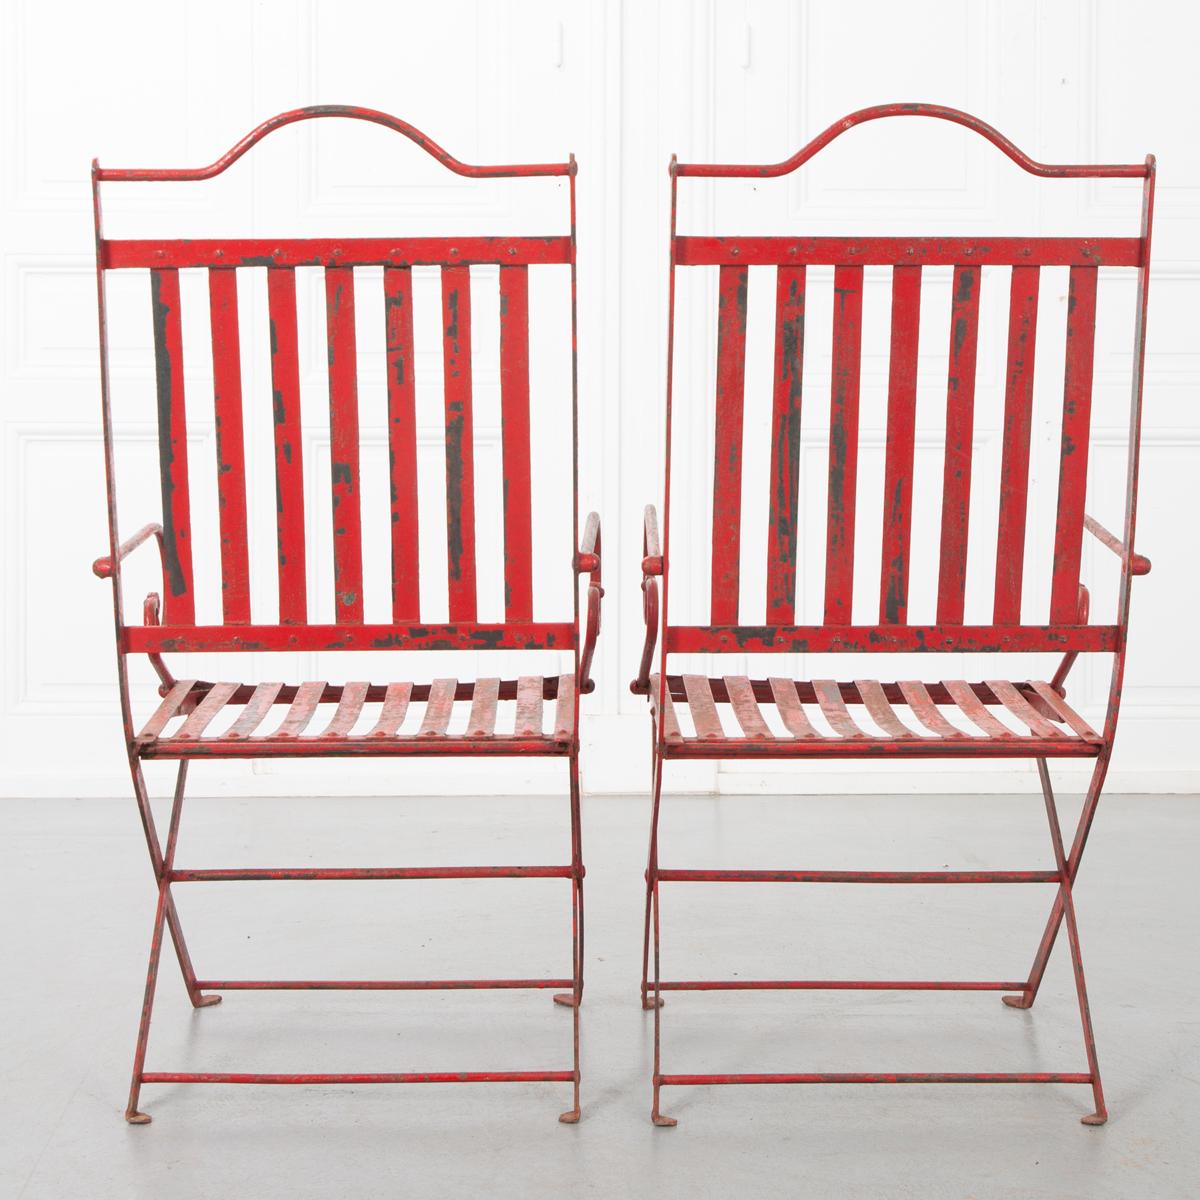 Pair of French Painted Metal Garden Chairs 1